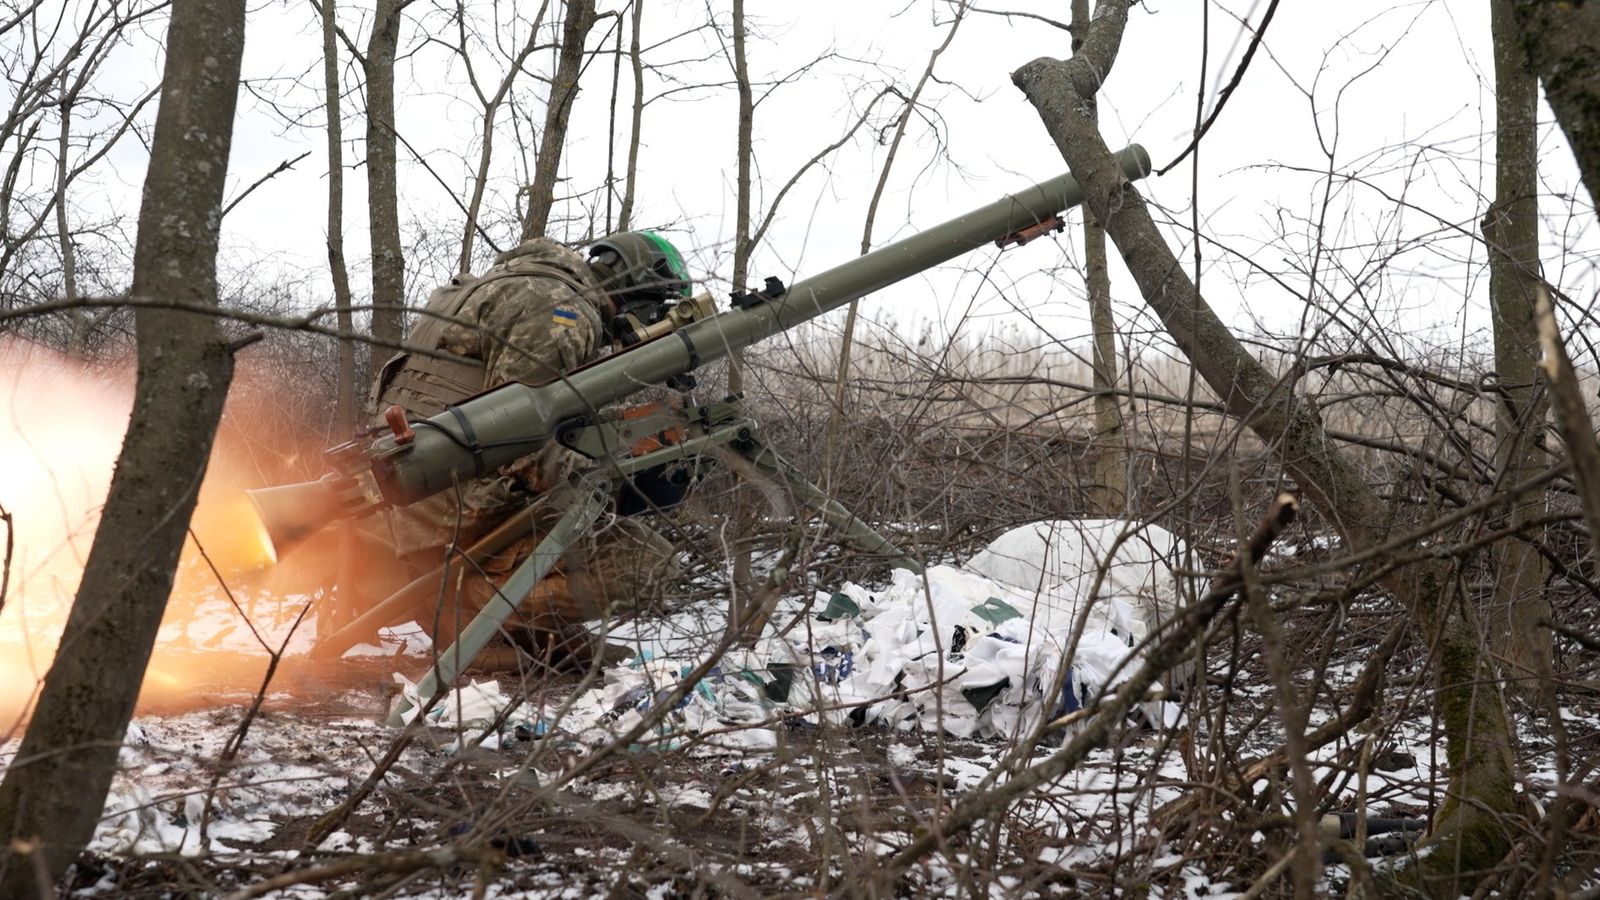 Ukraine-Russia war: On the front line with Ukrainian troops as they try to hold back the Russian tide